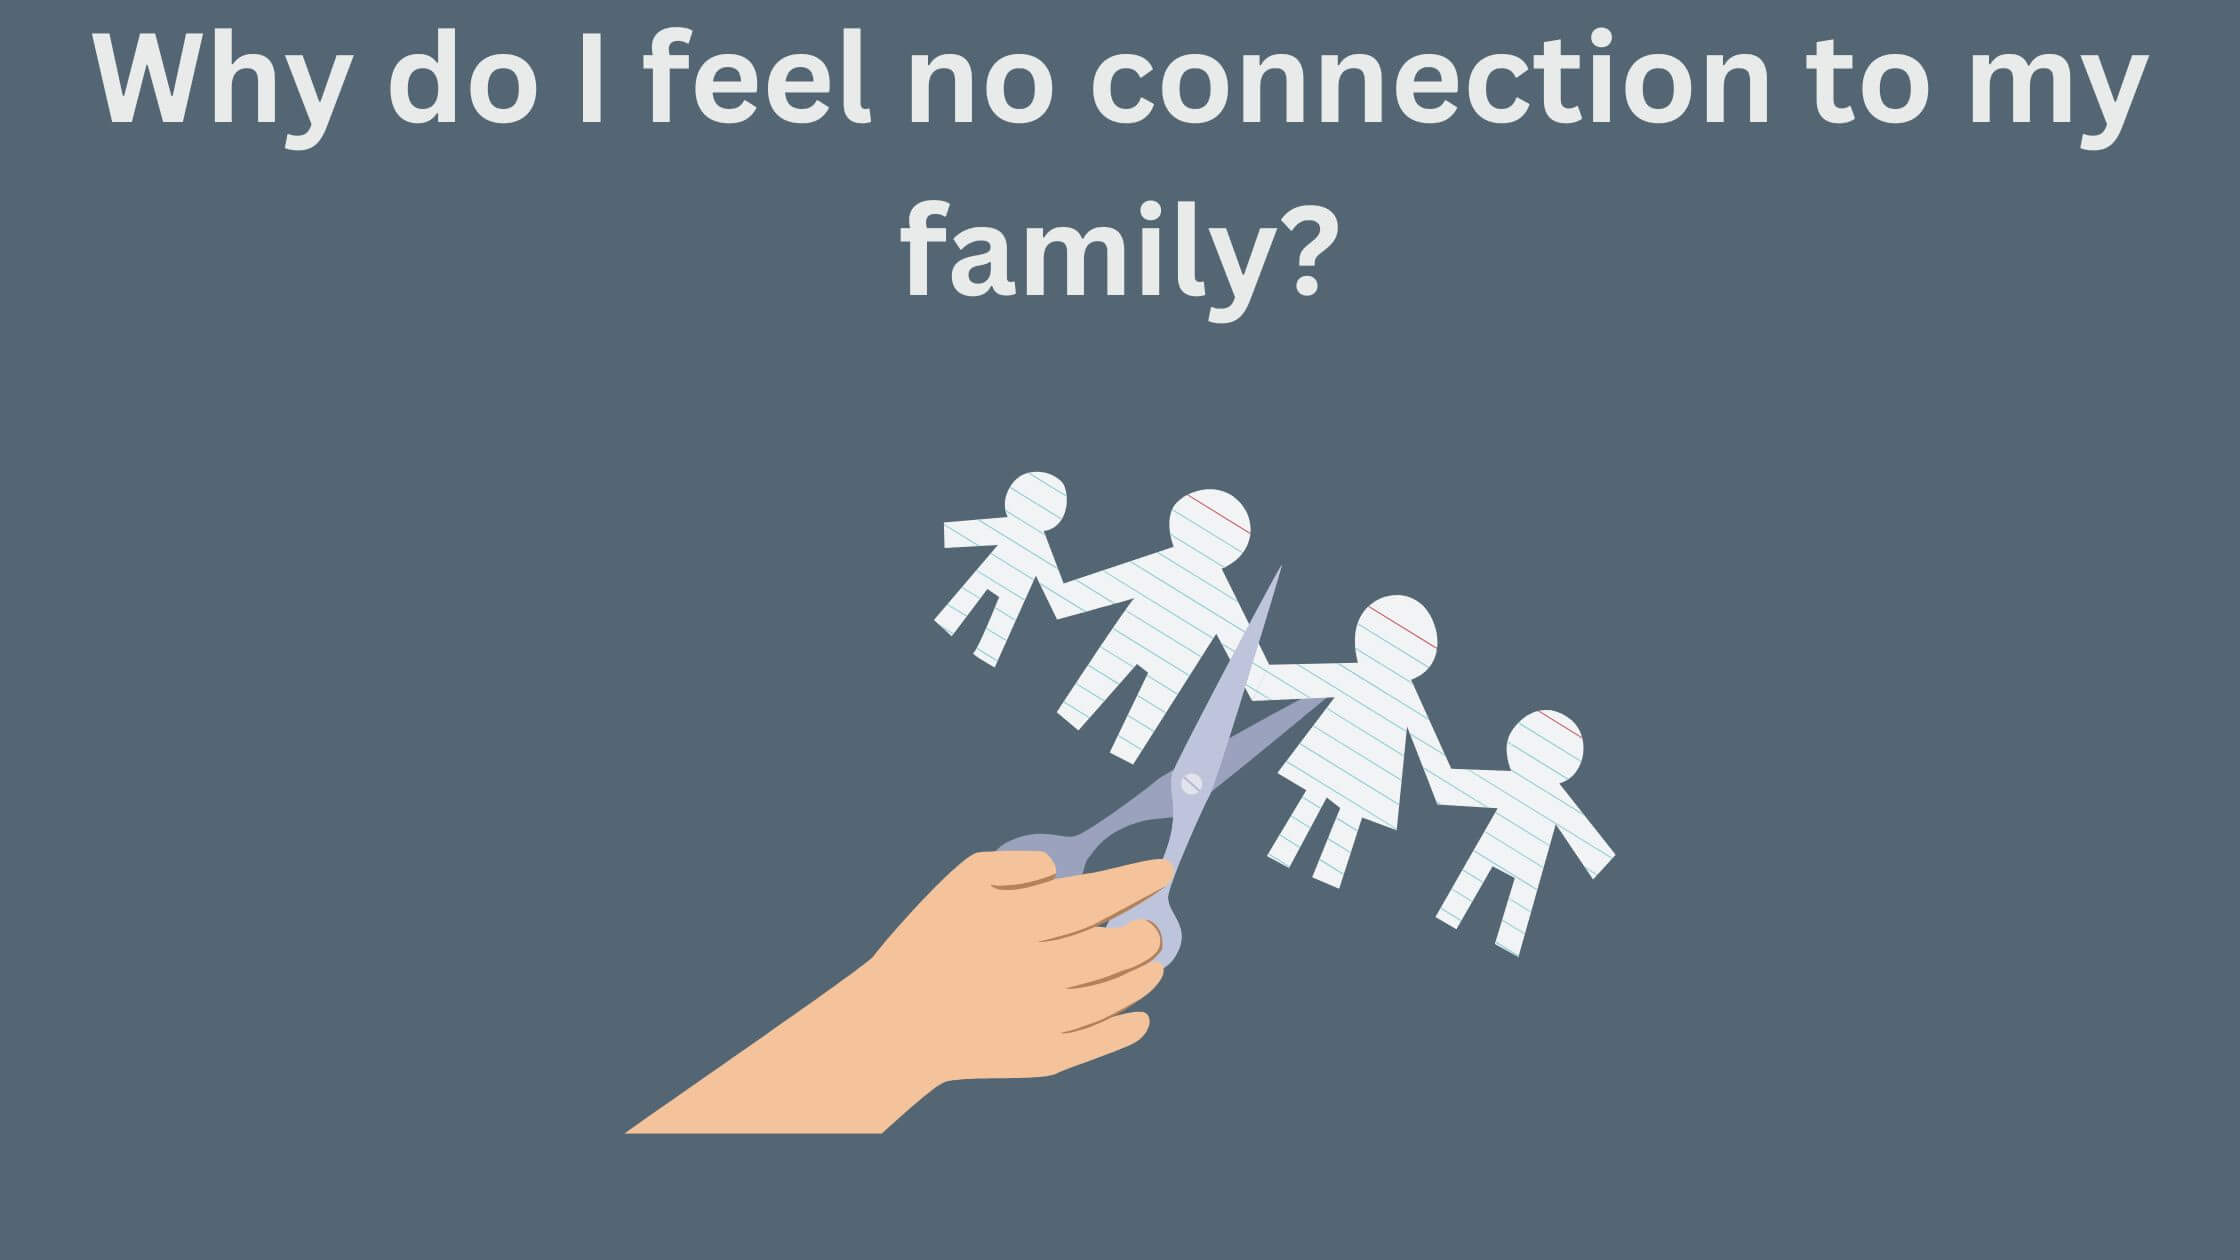 Why do I feel no connection to my family?